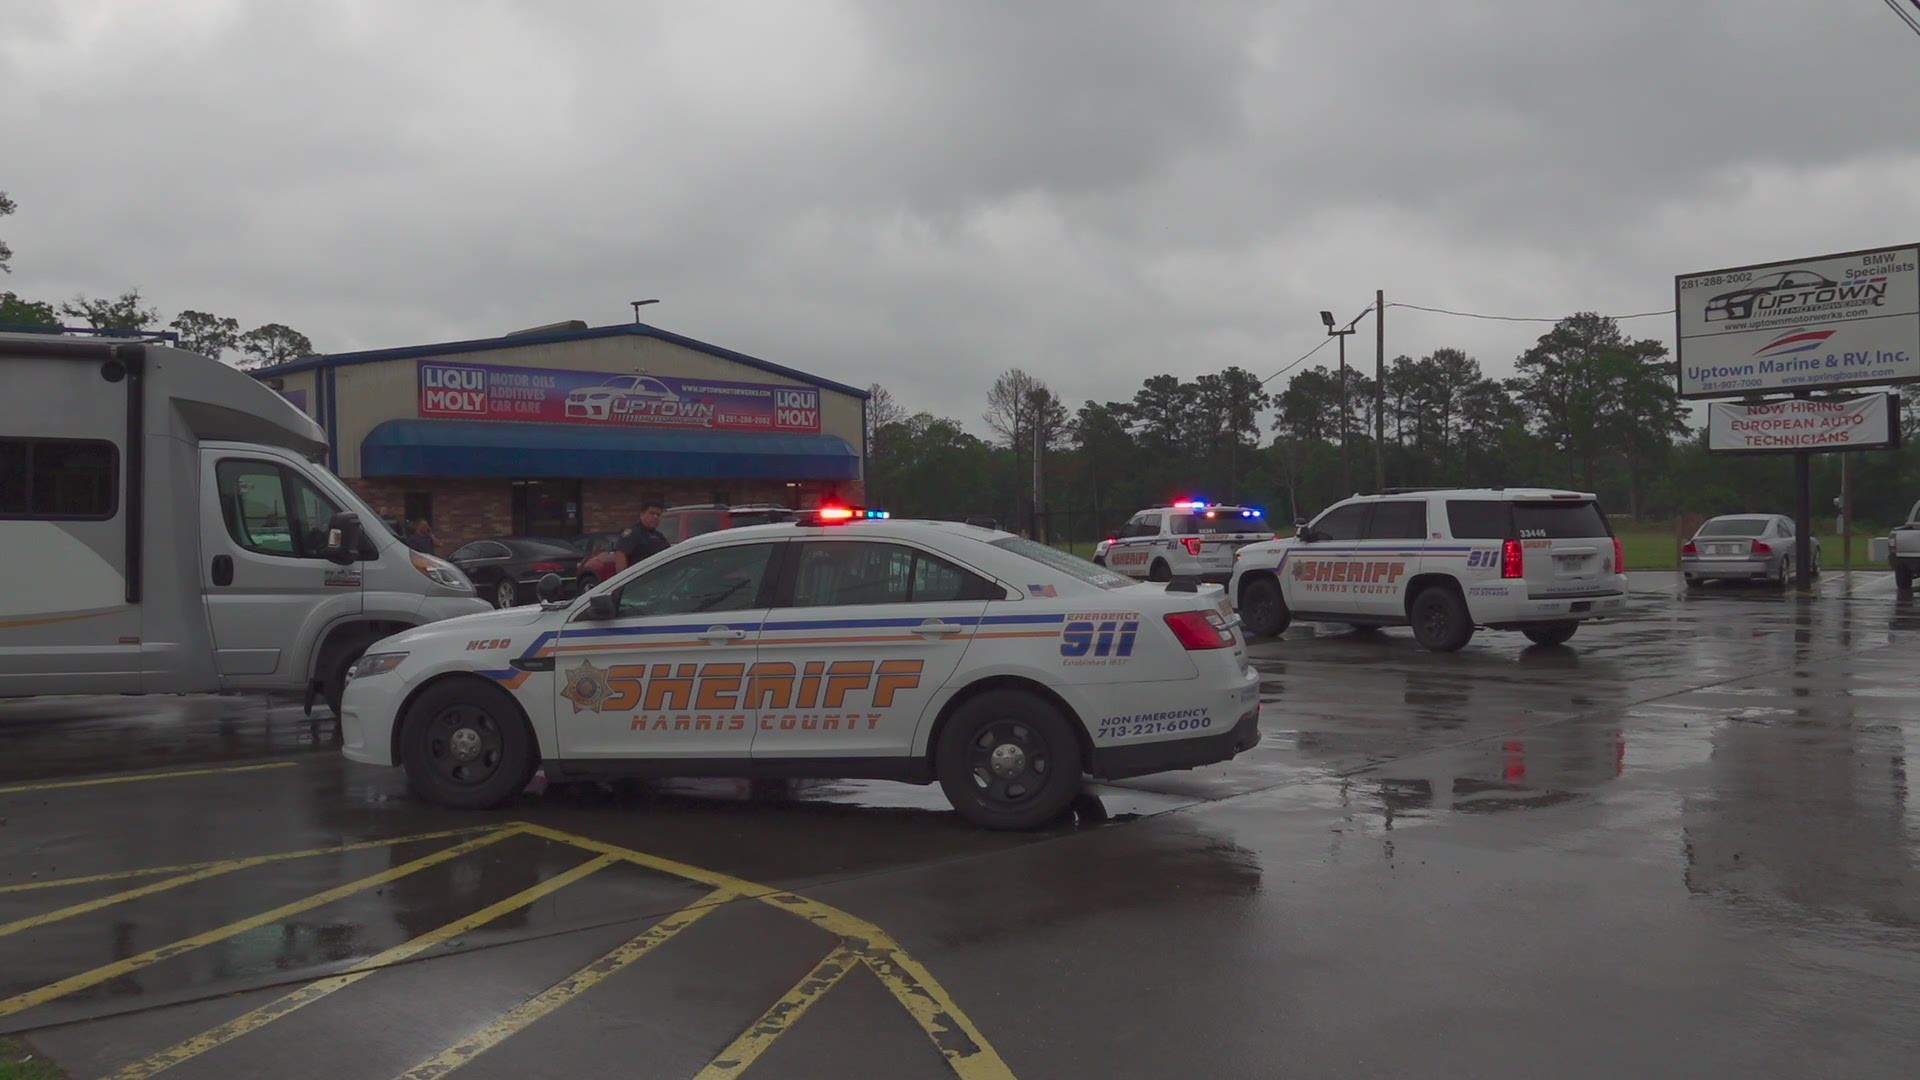 An auto shop employee in Spring was killed when a vehicle fell off a lift and crushed him, according to the Harris County Sheriff’s Office.